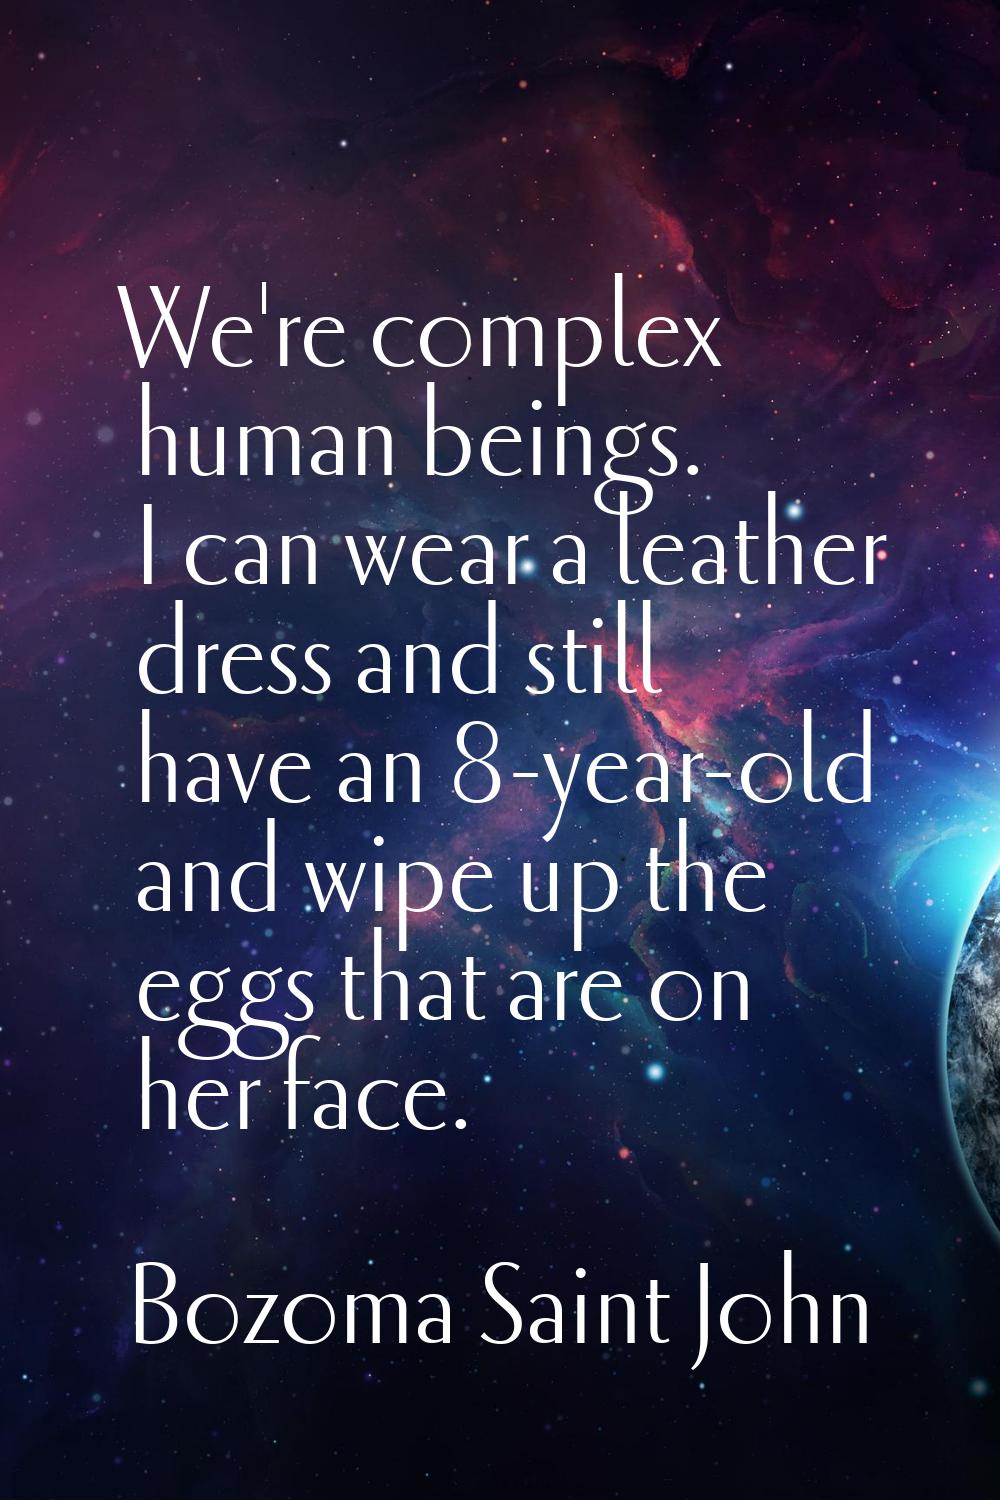 We're complex human beings. I can wear a leather dress and still have an 8-year-old and wipe up the